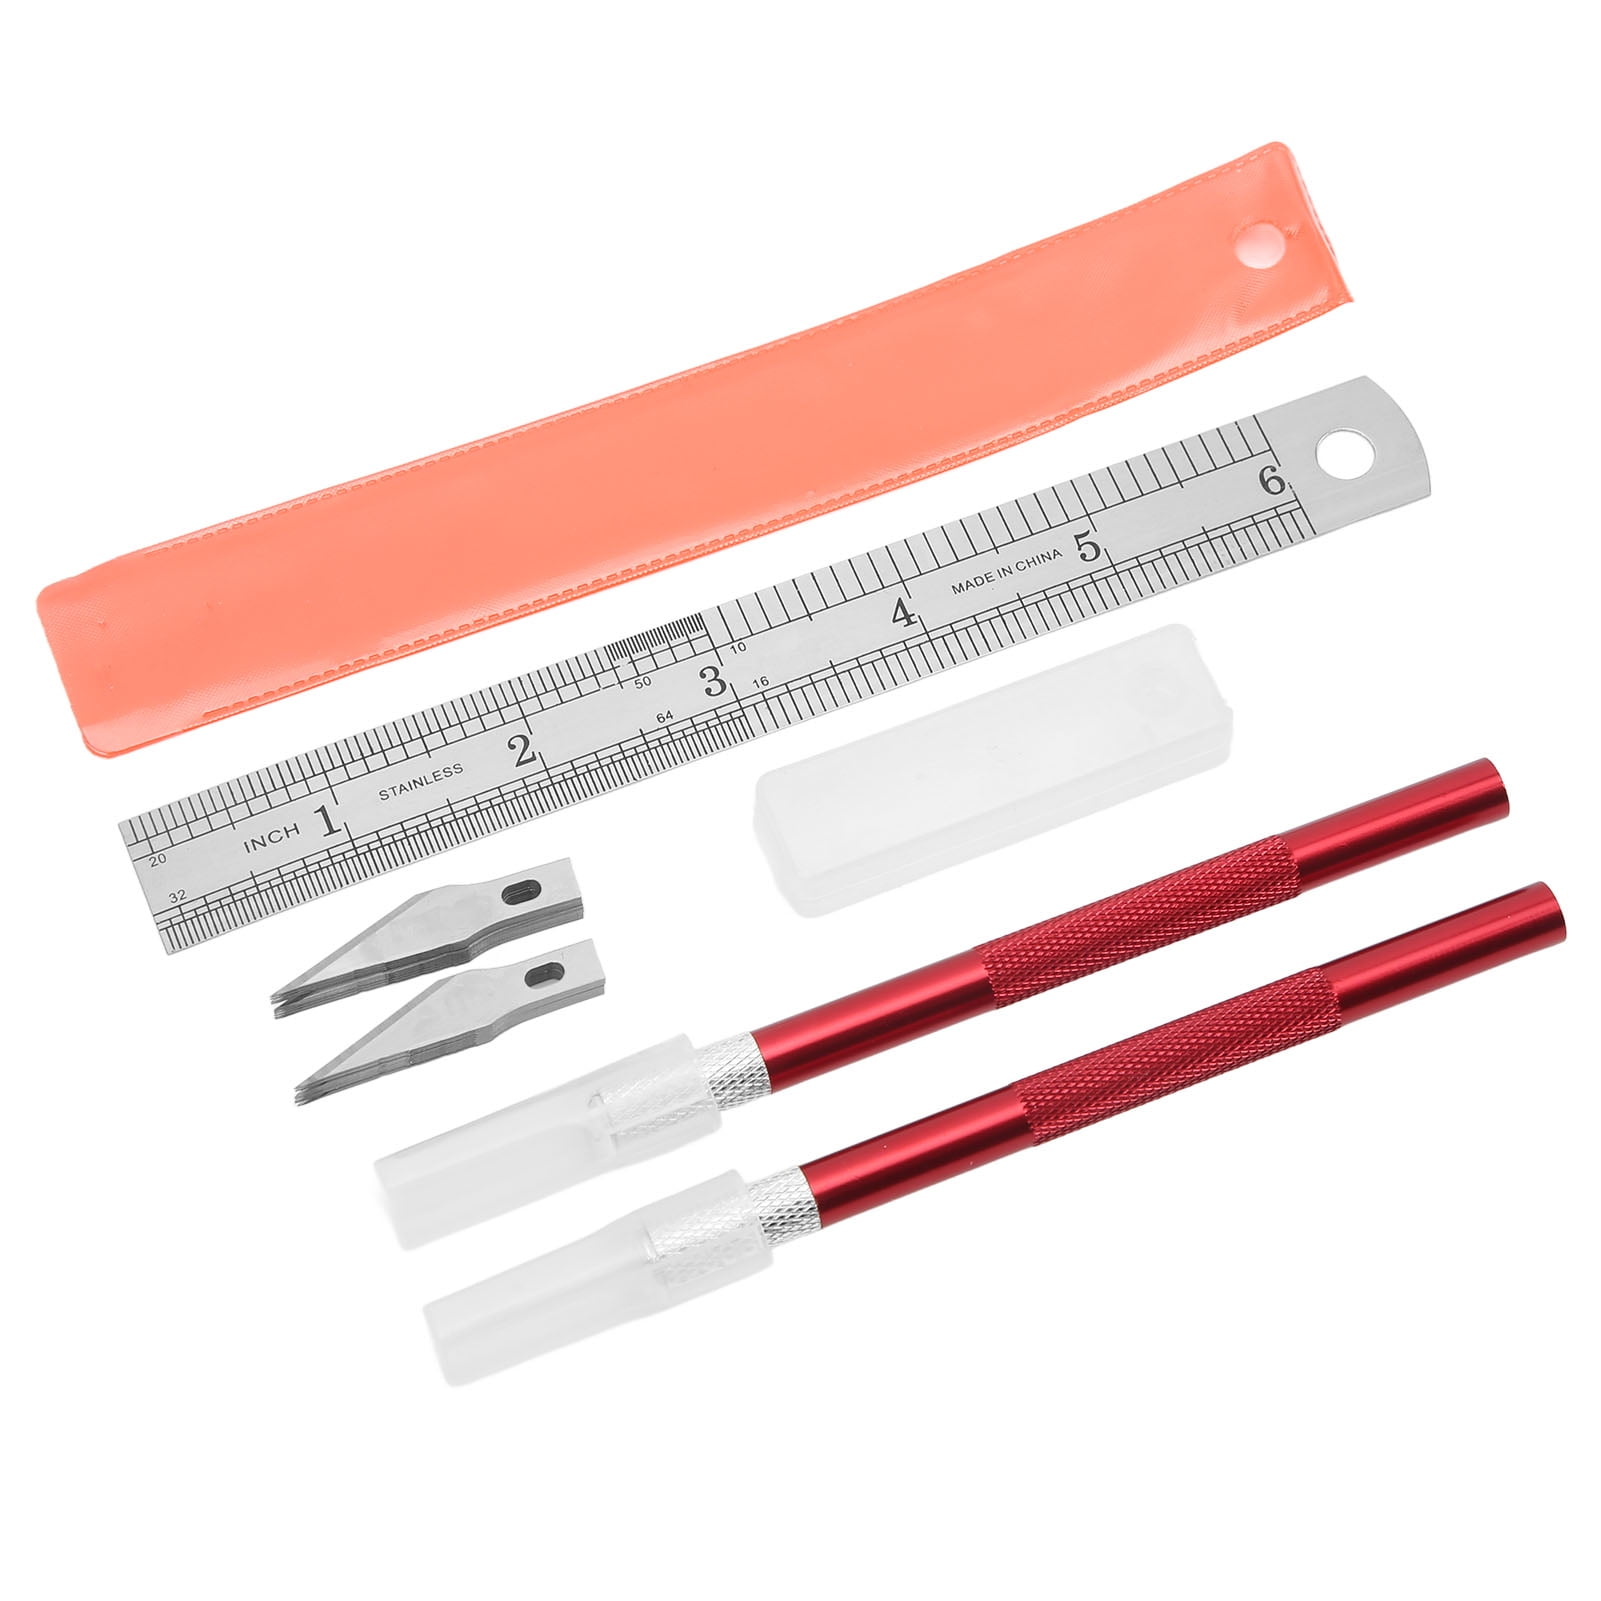 1PCS Exacto Knife Hobby Knife with Safety Cap and Craft Ruler and 20PCS Exacto  Blades for Crafting and Cutting Carving Scrapbooking Art Work Cutting (Red)  